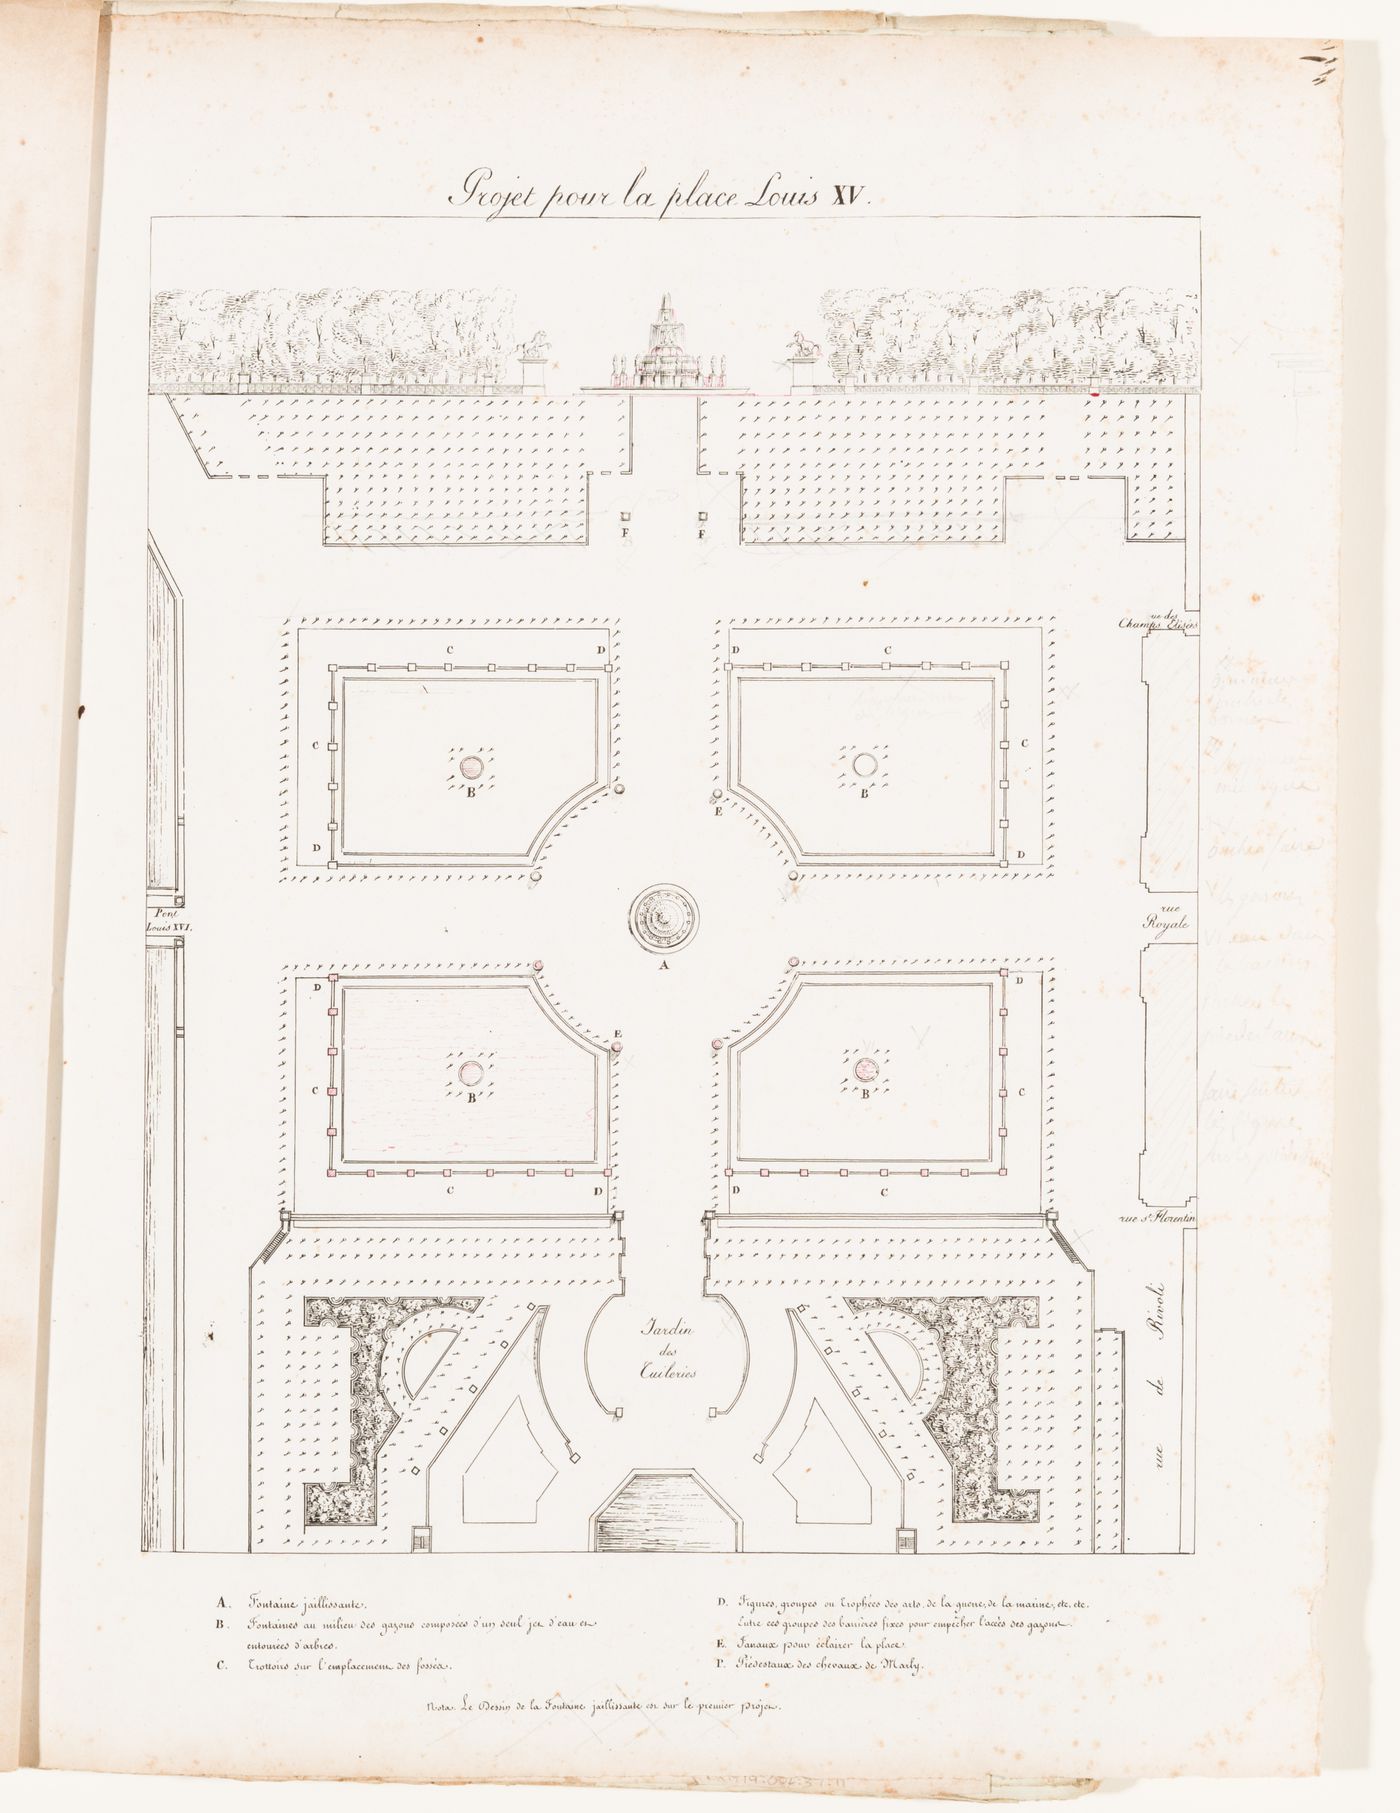 Plan and elevation for place Louis XV with five fountains and a promenade bordered by a row of sculptures